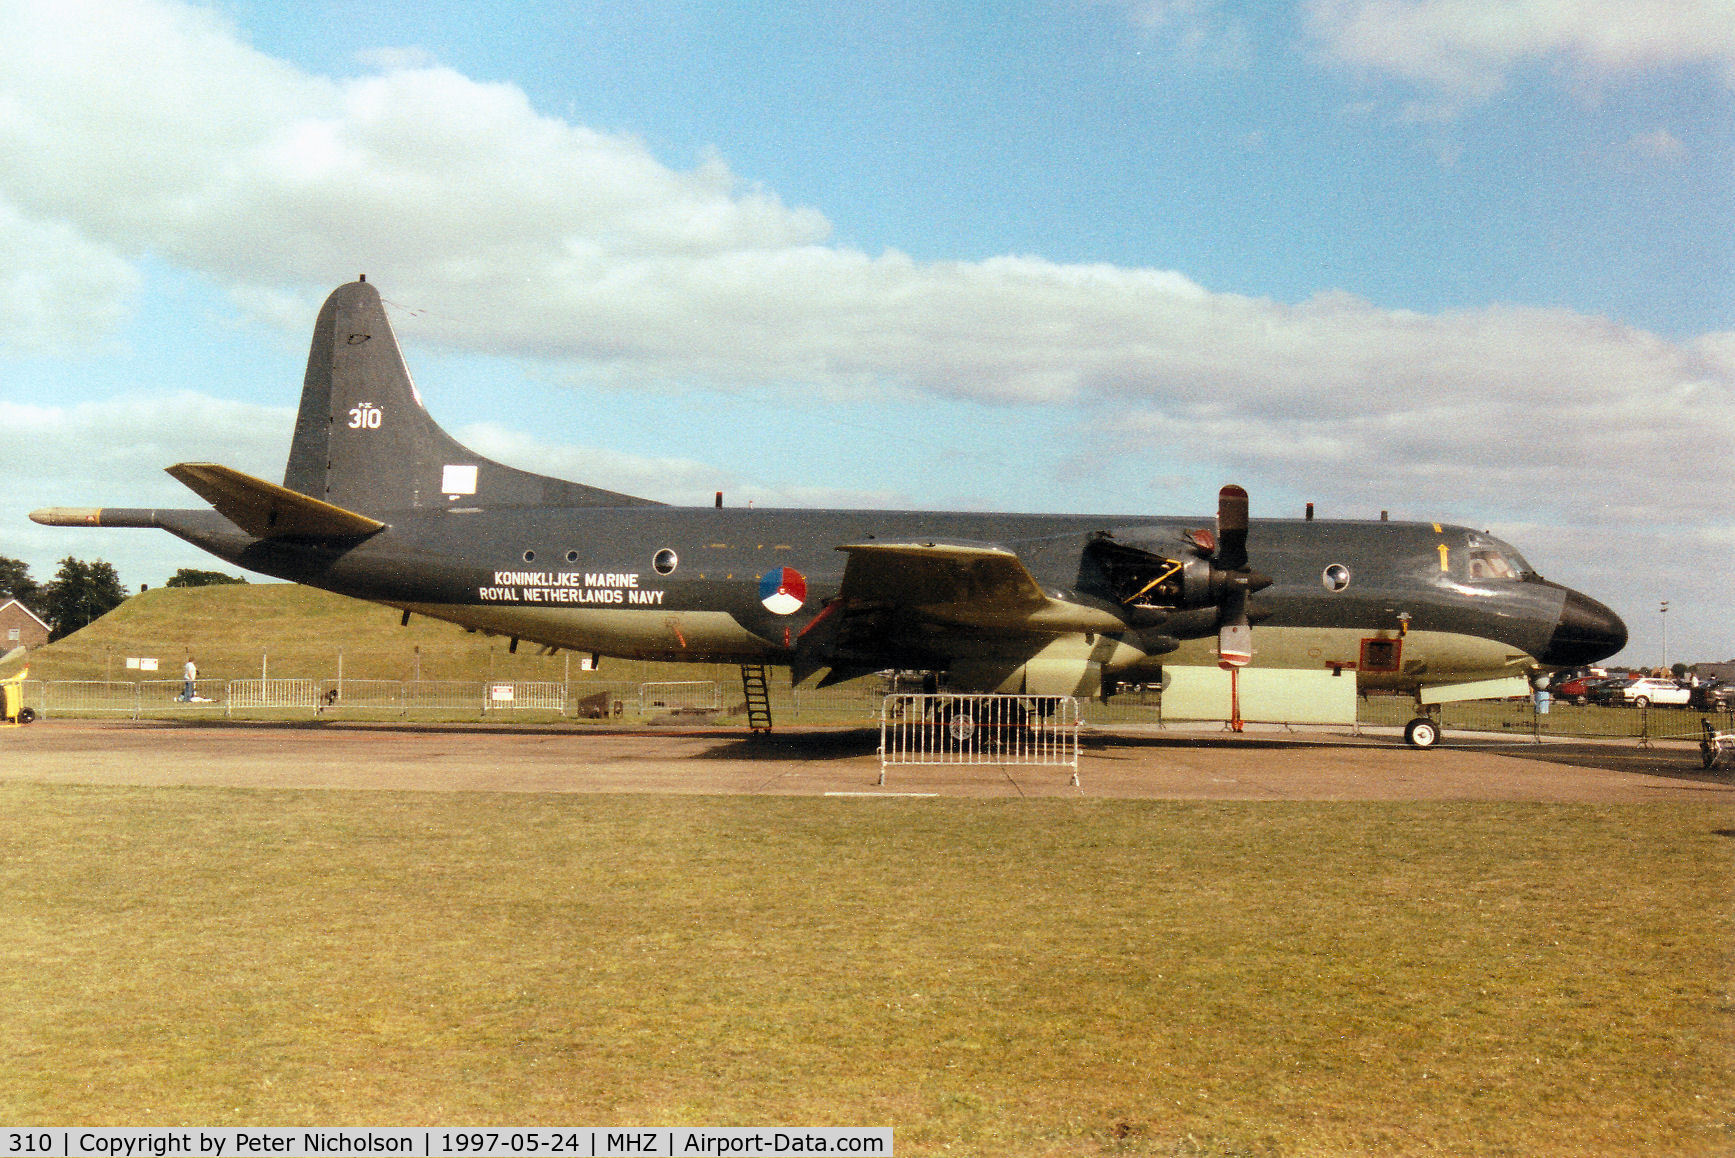 310, Lockheed P-3C Orion C/N 285E-5773, P-3C Orion of 320 Squadron Royal Netherlands Navy on display at the 1997 RAF Mildenhall Air Fete.